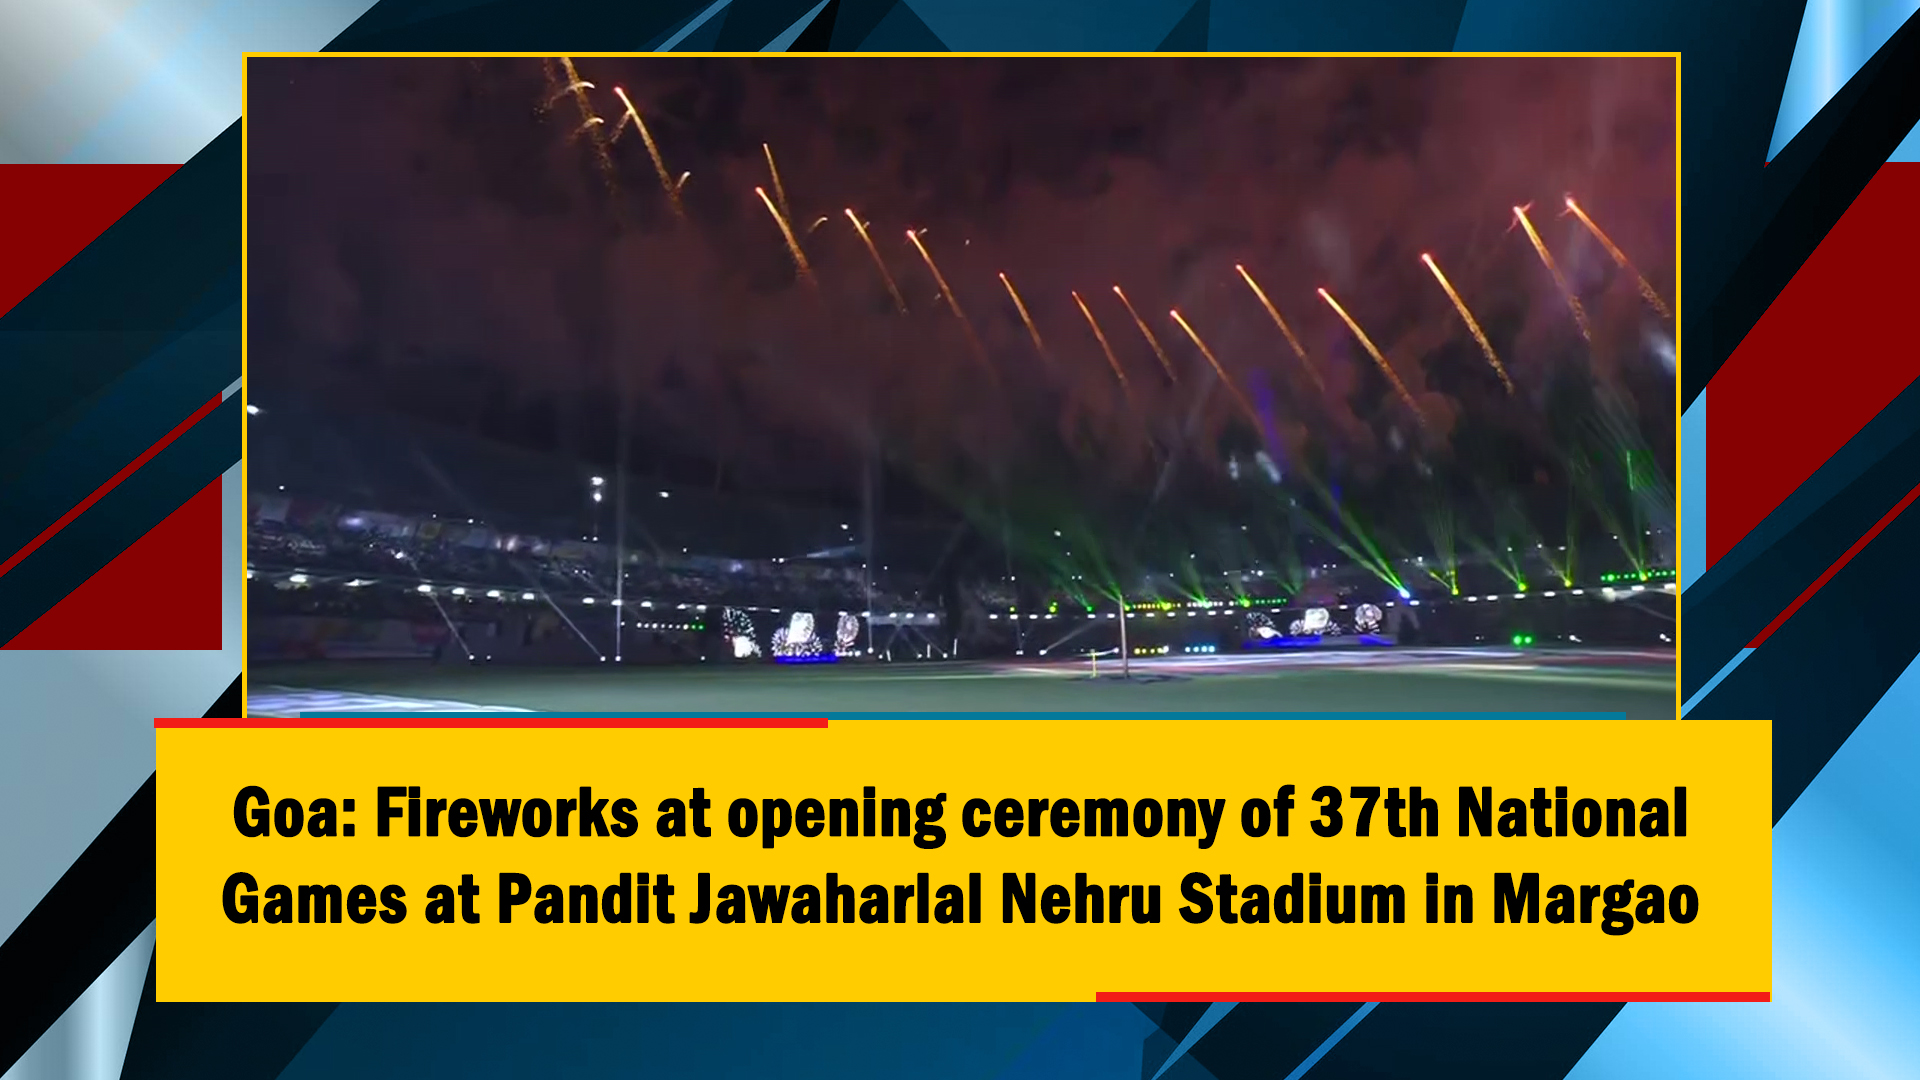 Goa: Fireworks at opening ceremony of 37th National Games at Pandit Jawaharlal Nehru Stadium in Margao